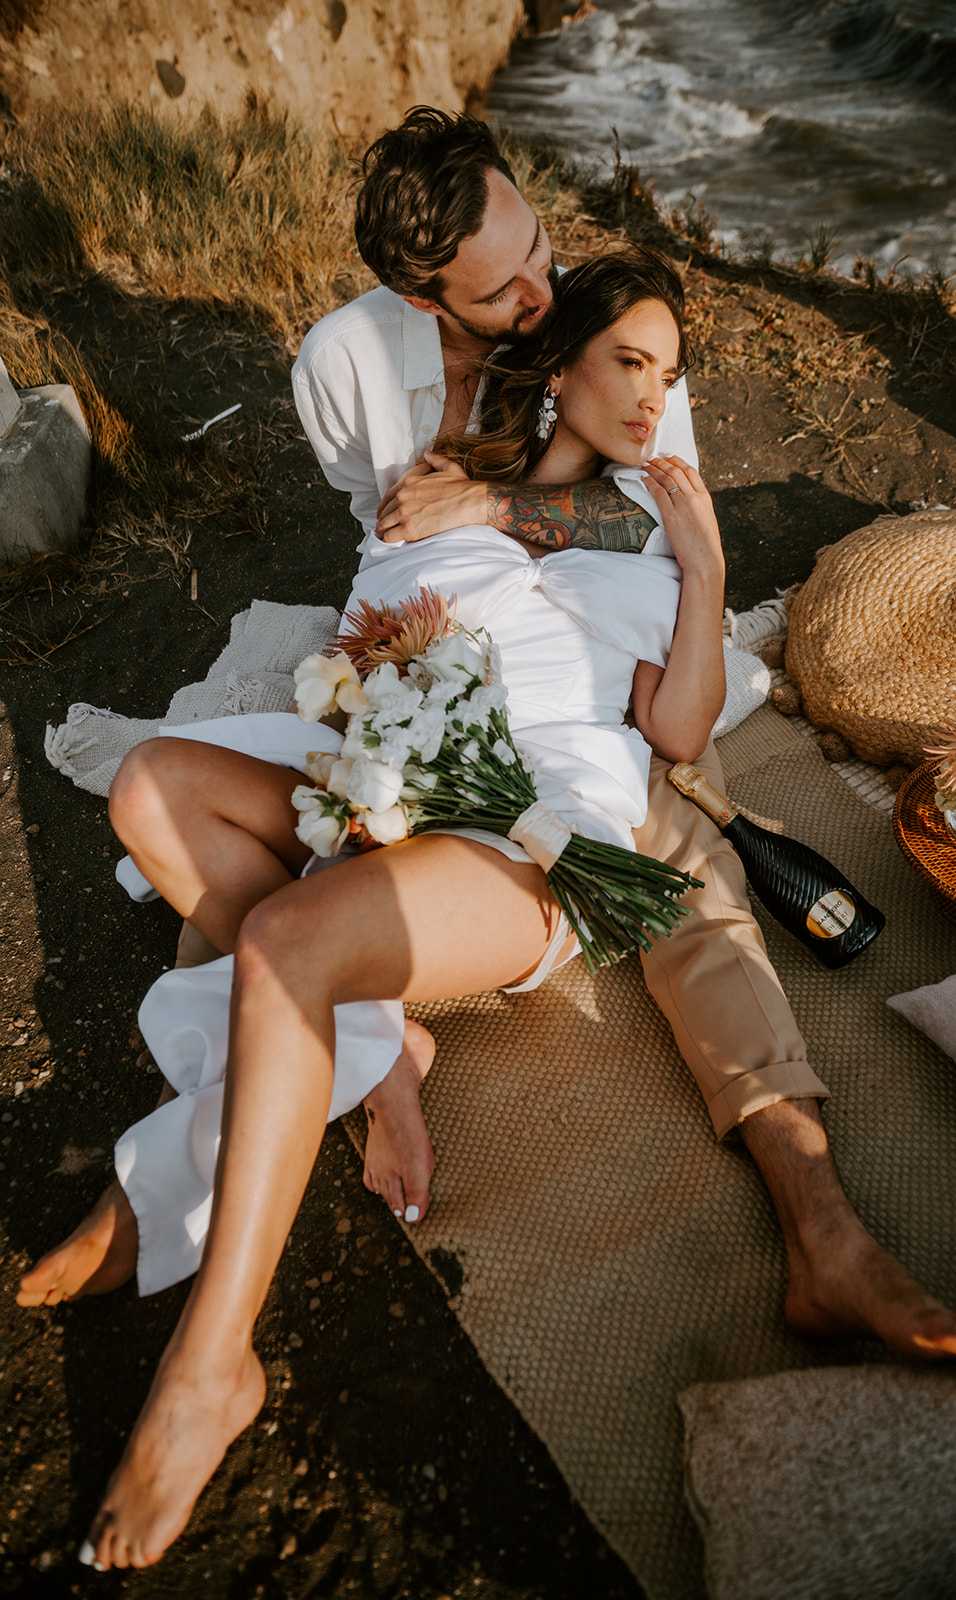 Bride laying on her husband wearing a short wedding dress holding a monochromatic bouquet